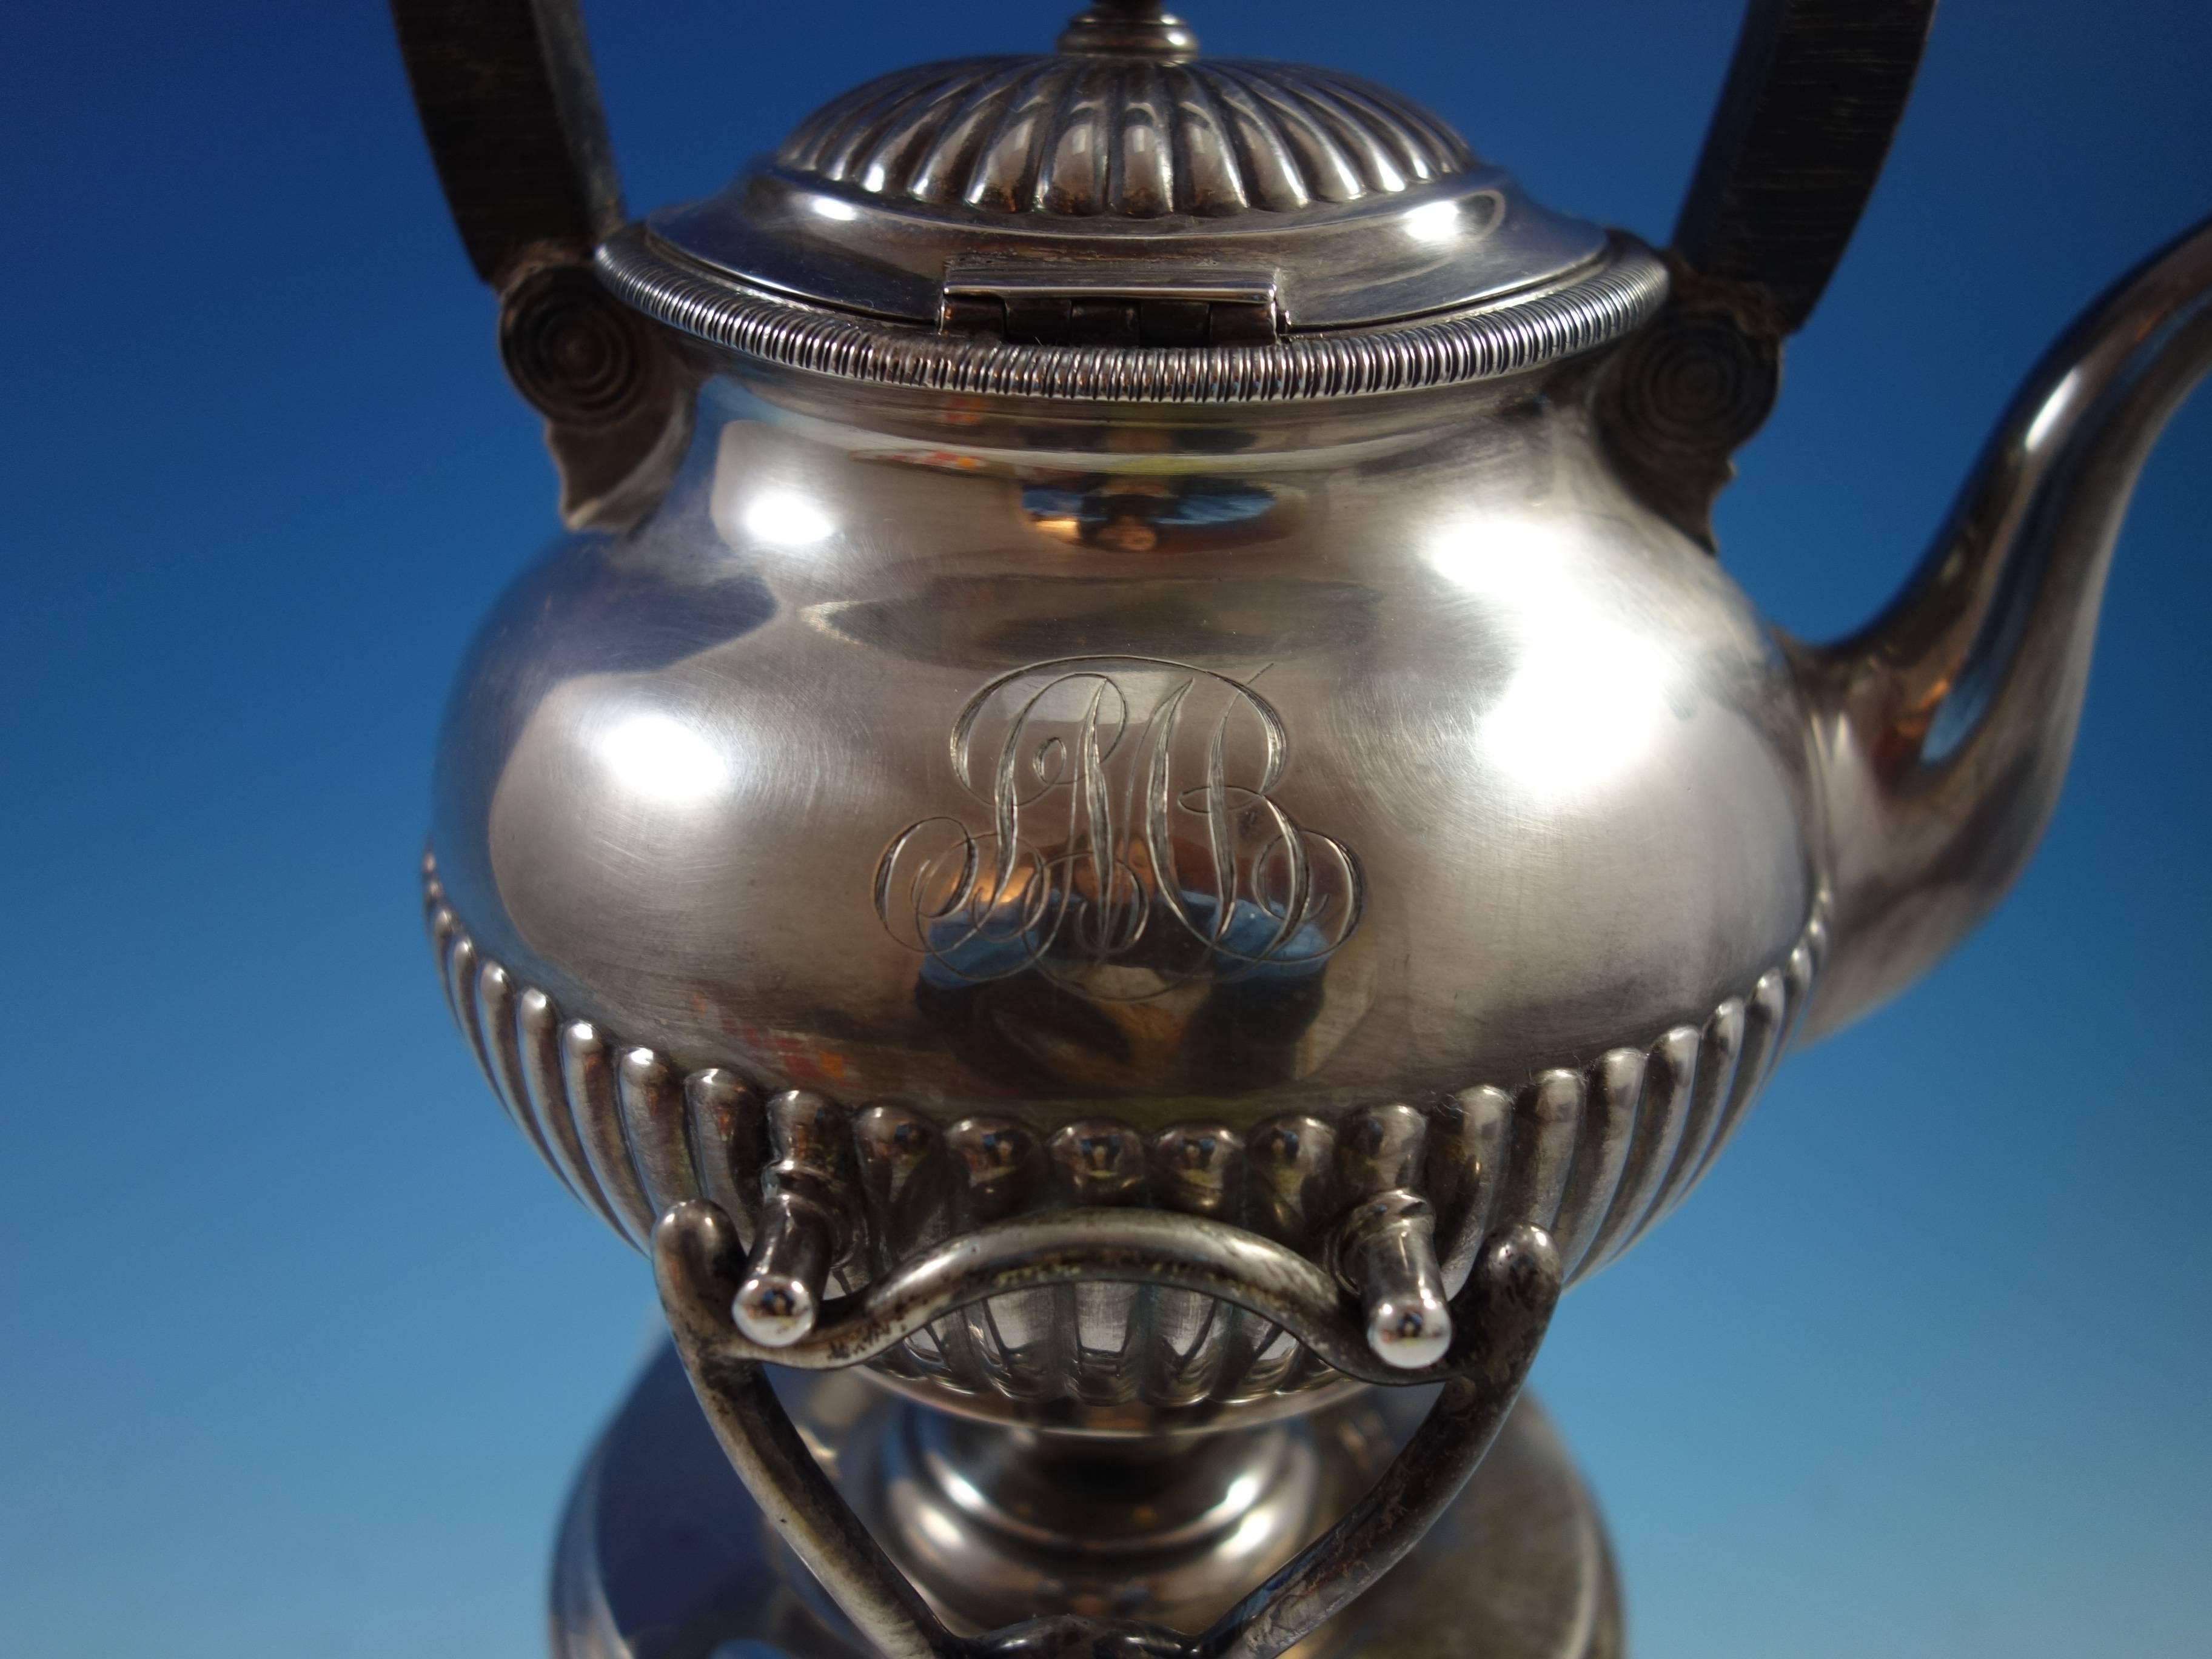 20th Century Bigelow, Kennard & Co. Sterling Silver Kettle on Stand with Ebony Hollowware